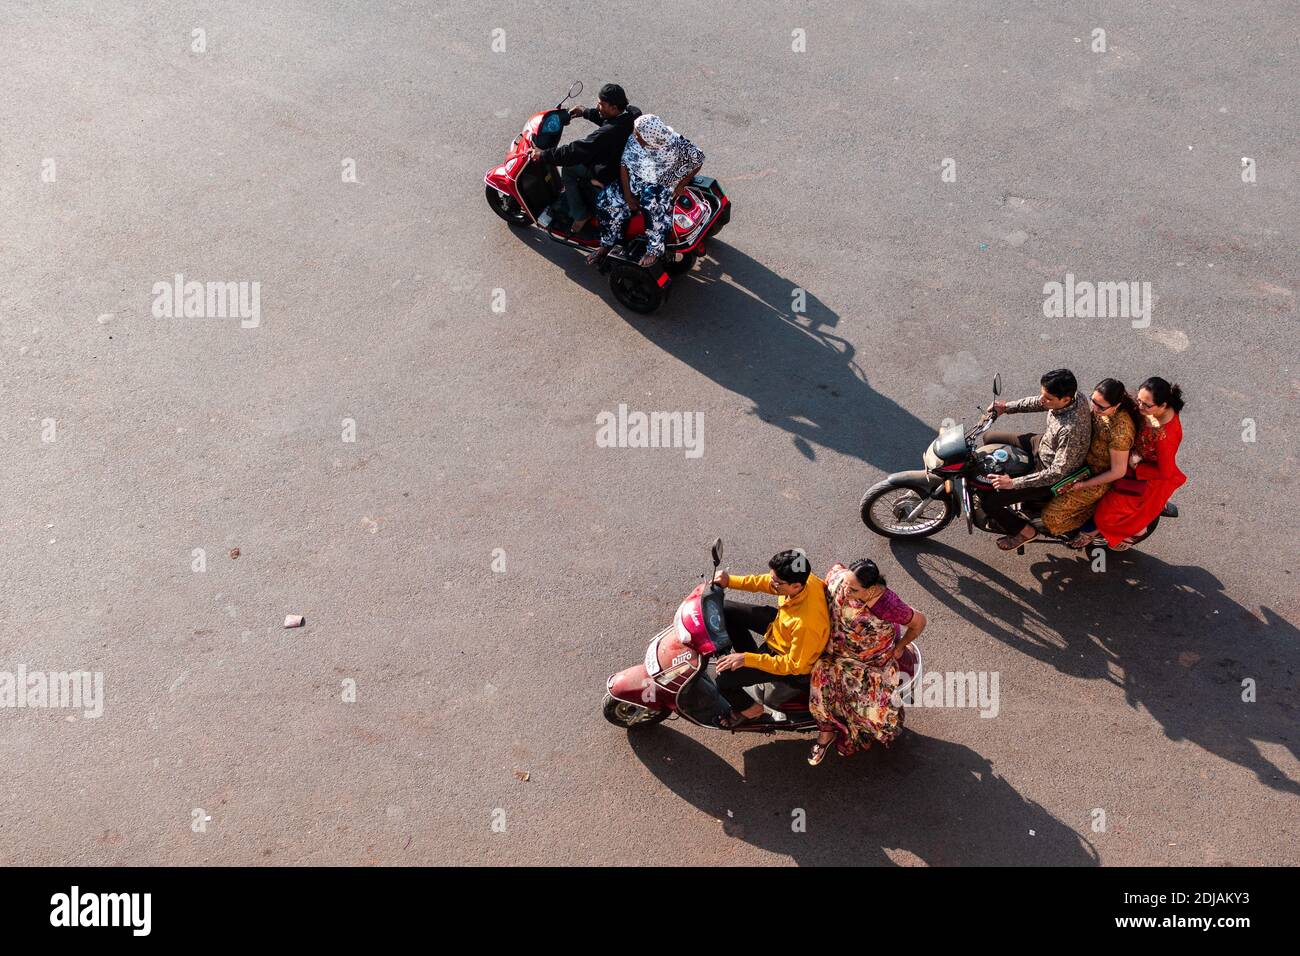 Jamnagar, Gujarat, India   December 2018: Aerial view of motorbikes carrying Indian families riding on a street in the city. Stock Photo